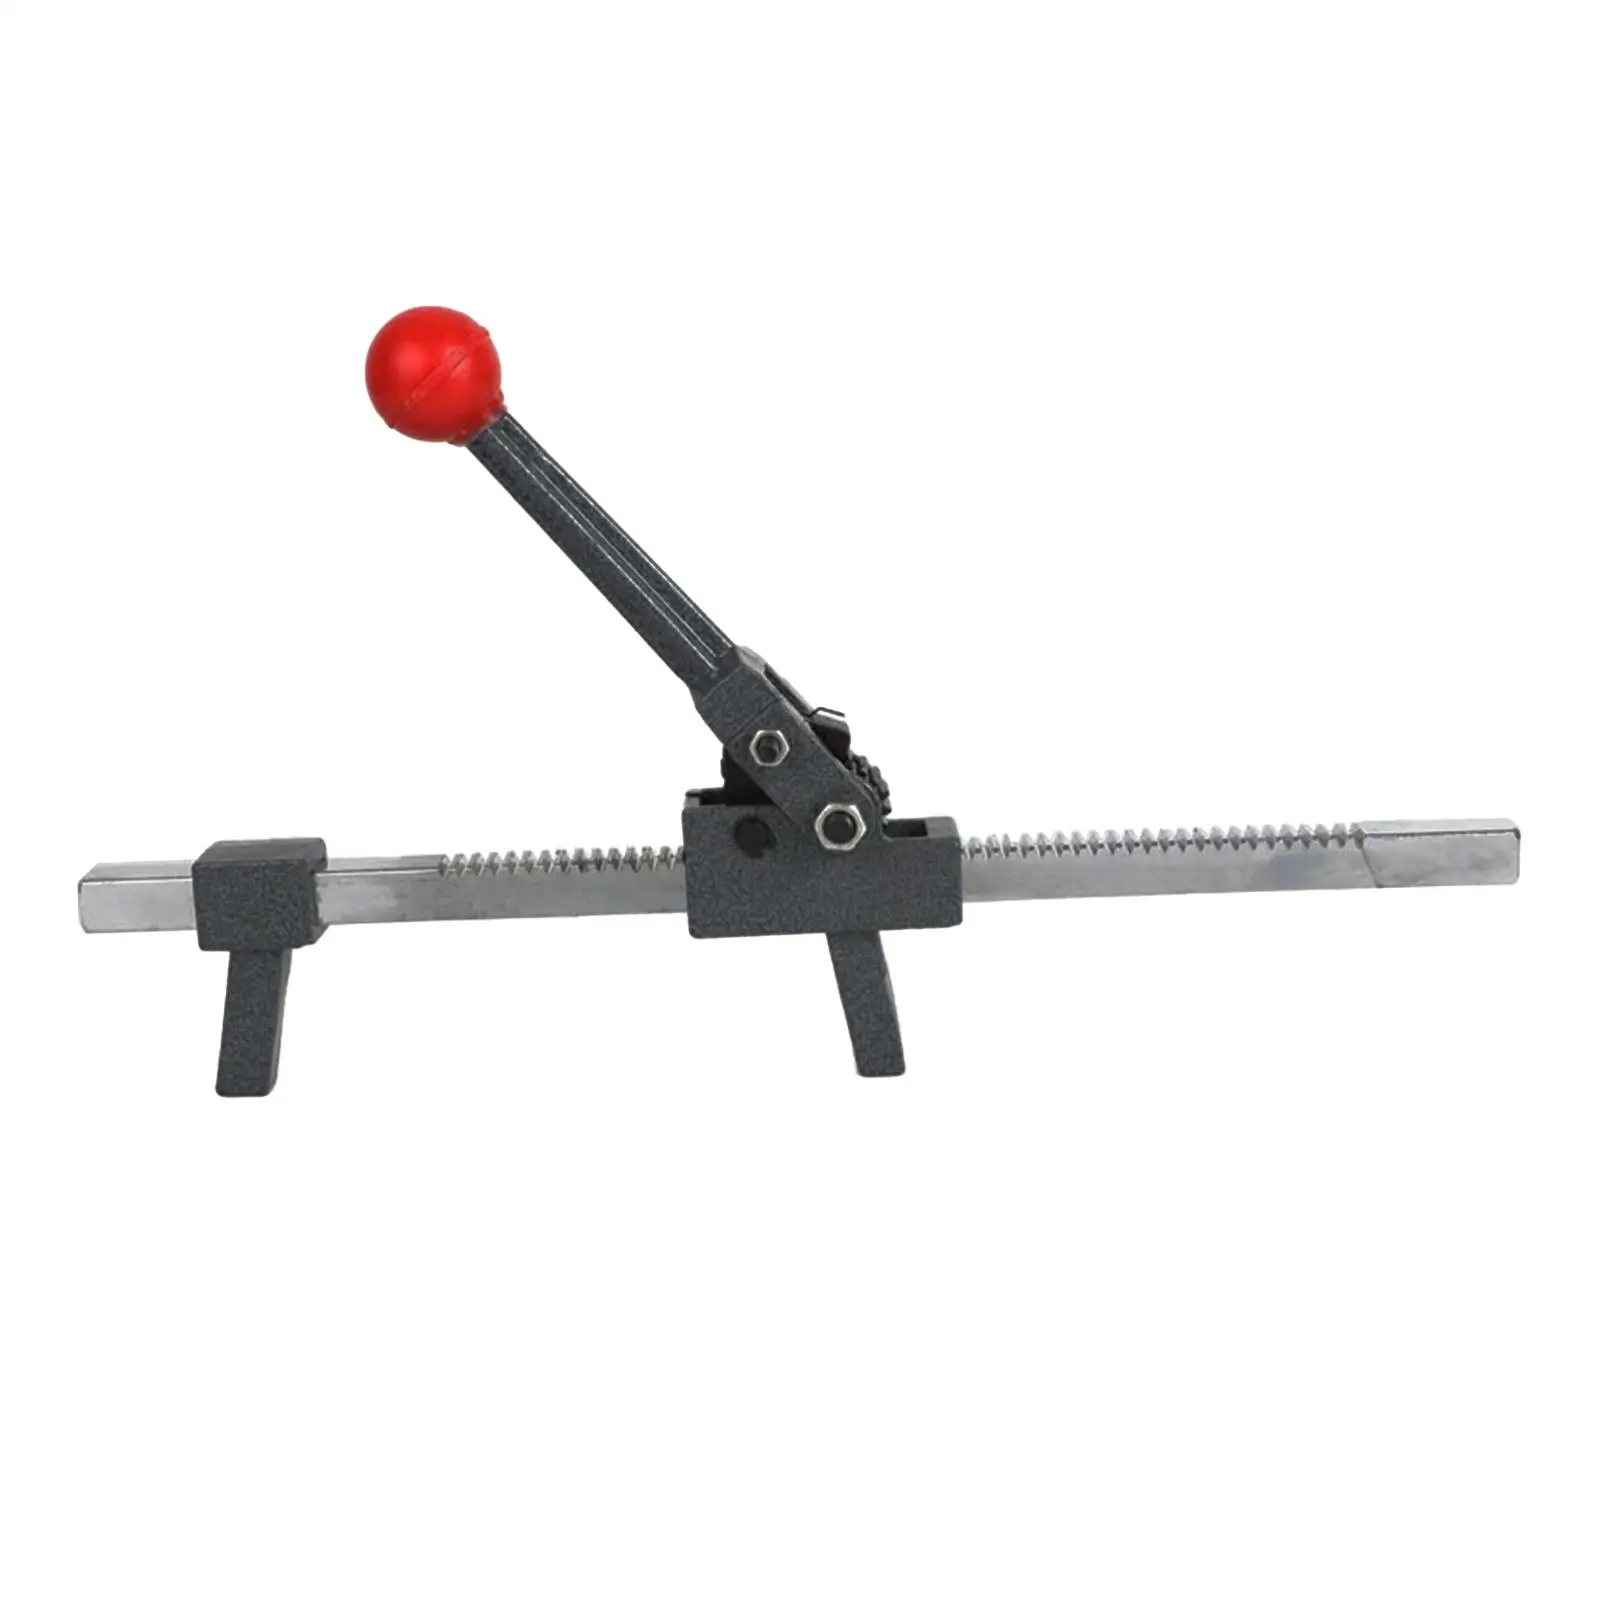 Manual Tire Changer Steel Replaces for Home Garage Tire Changer Bead Breaker